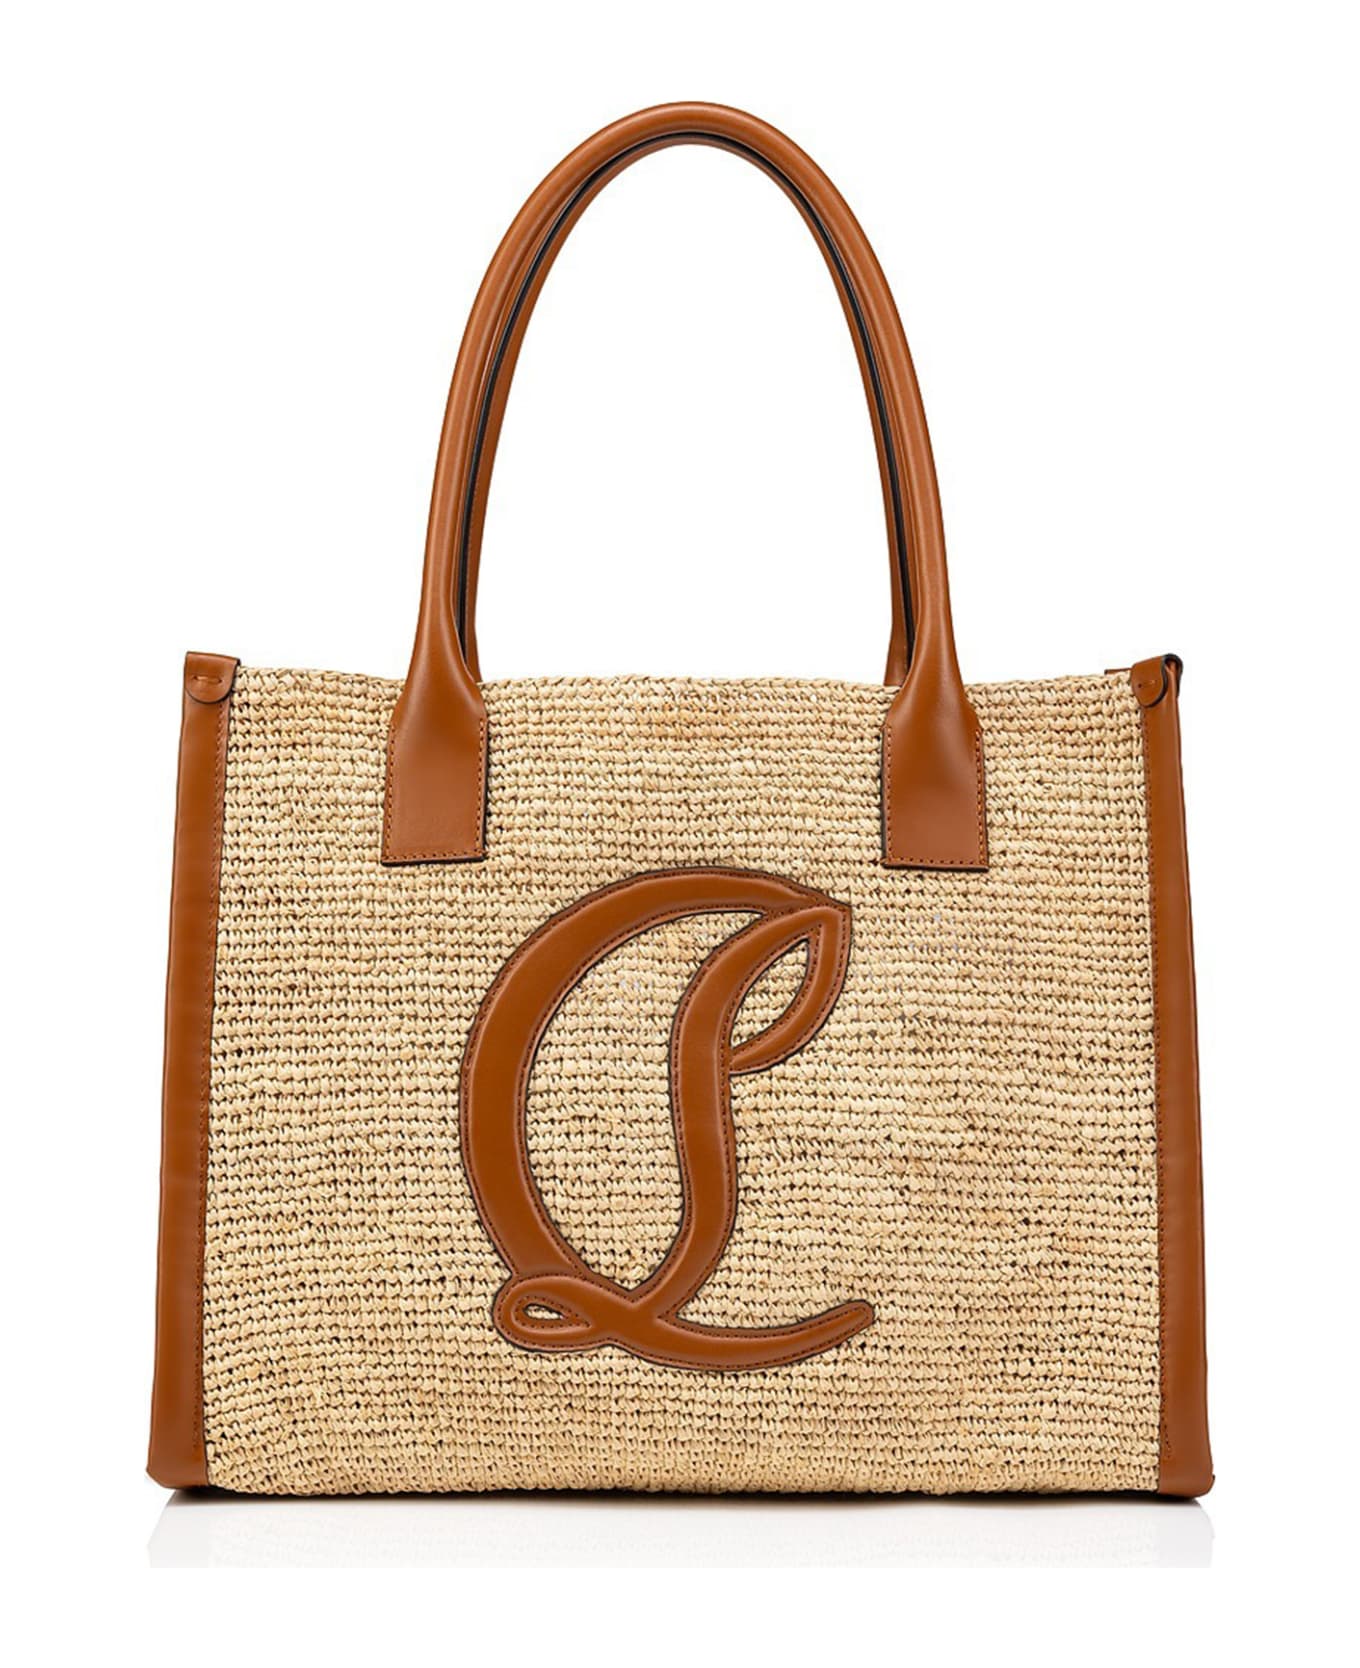 Christian Louboutin Tote - Natural/cuoio